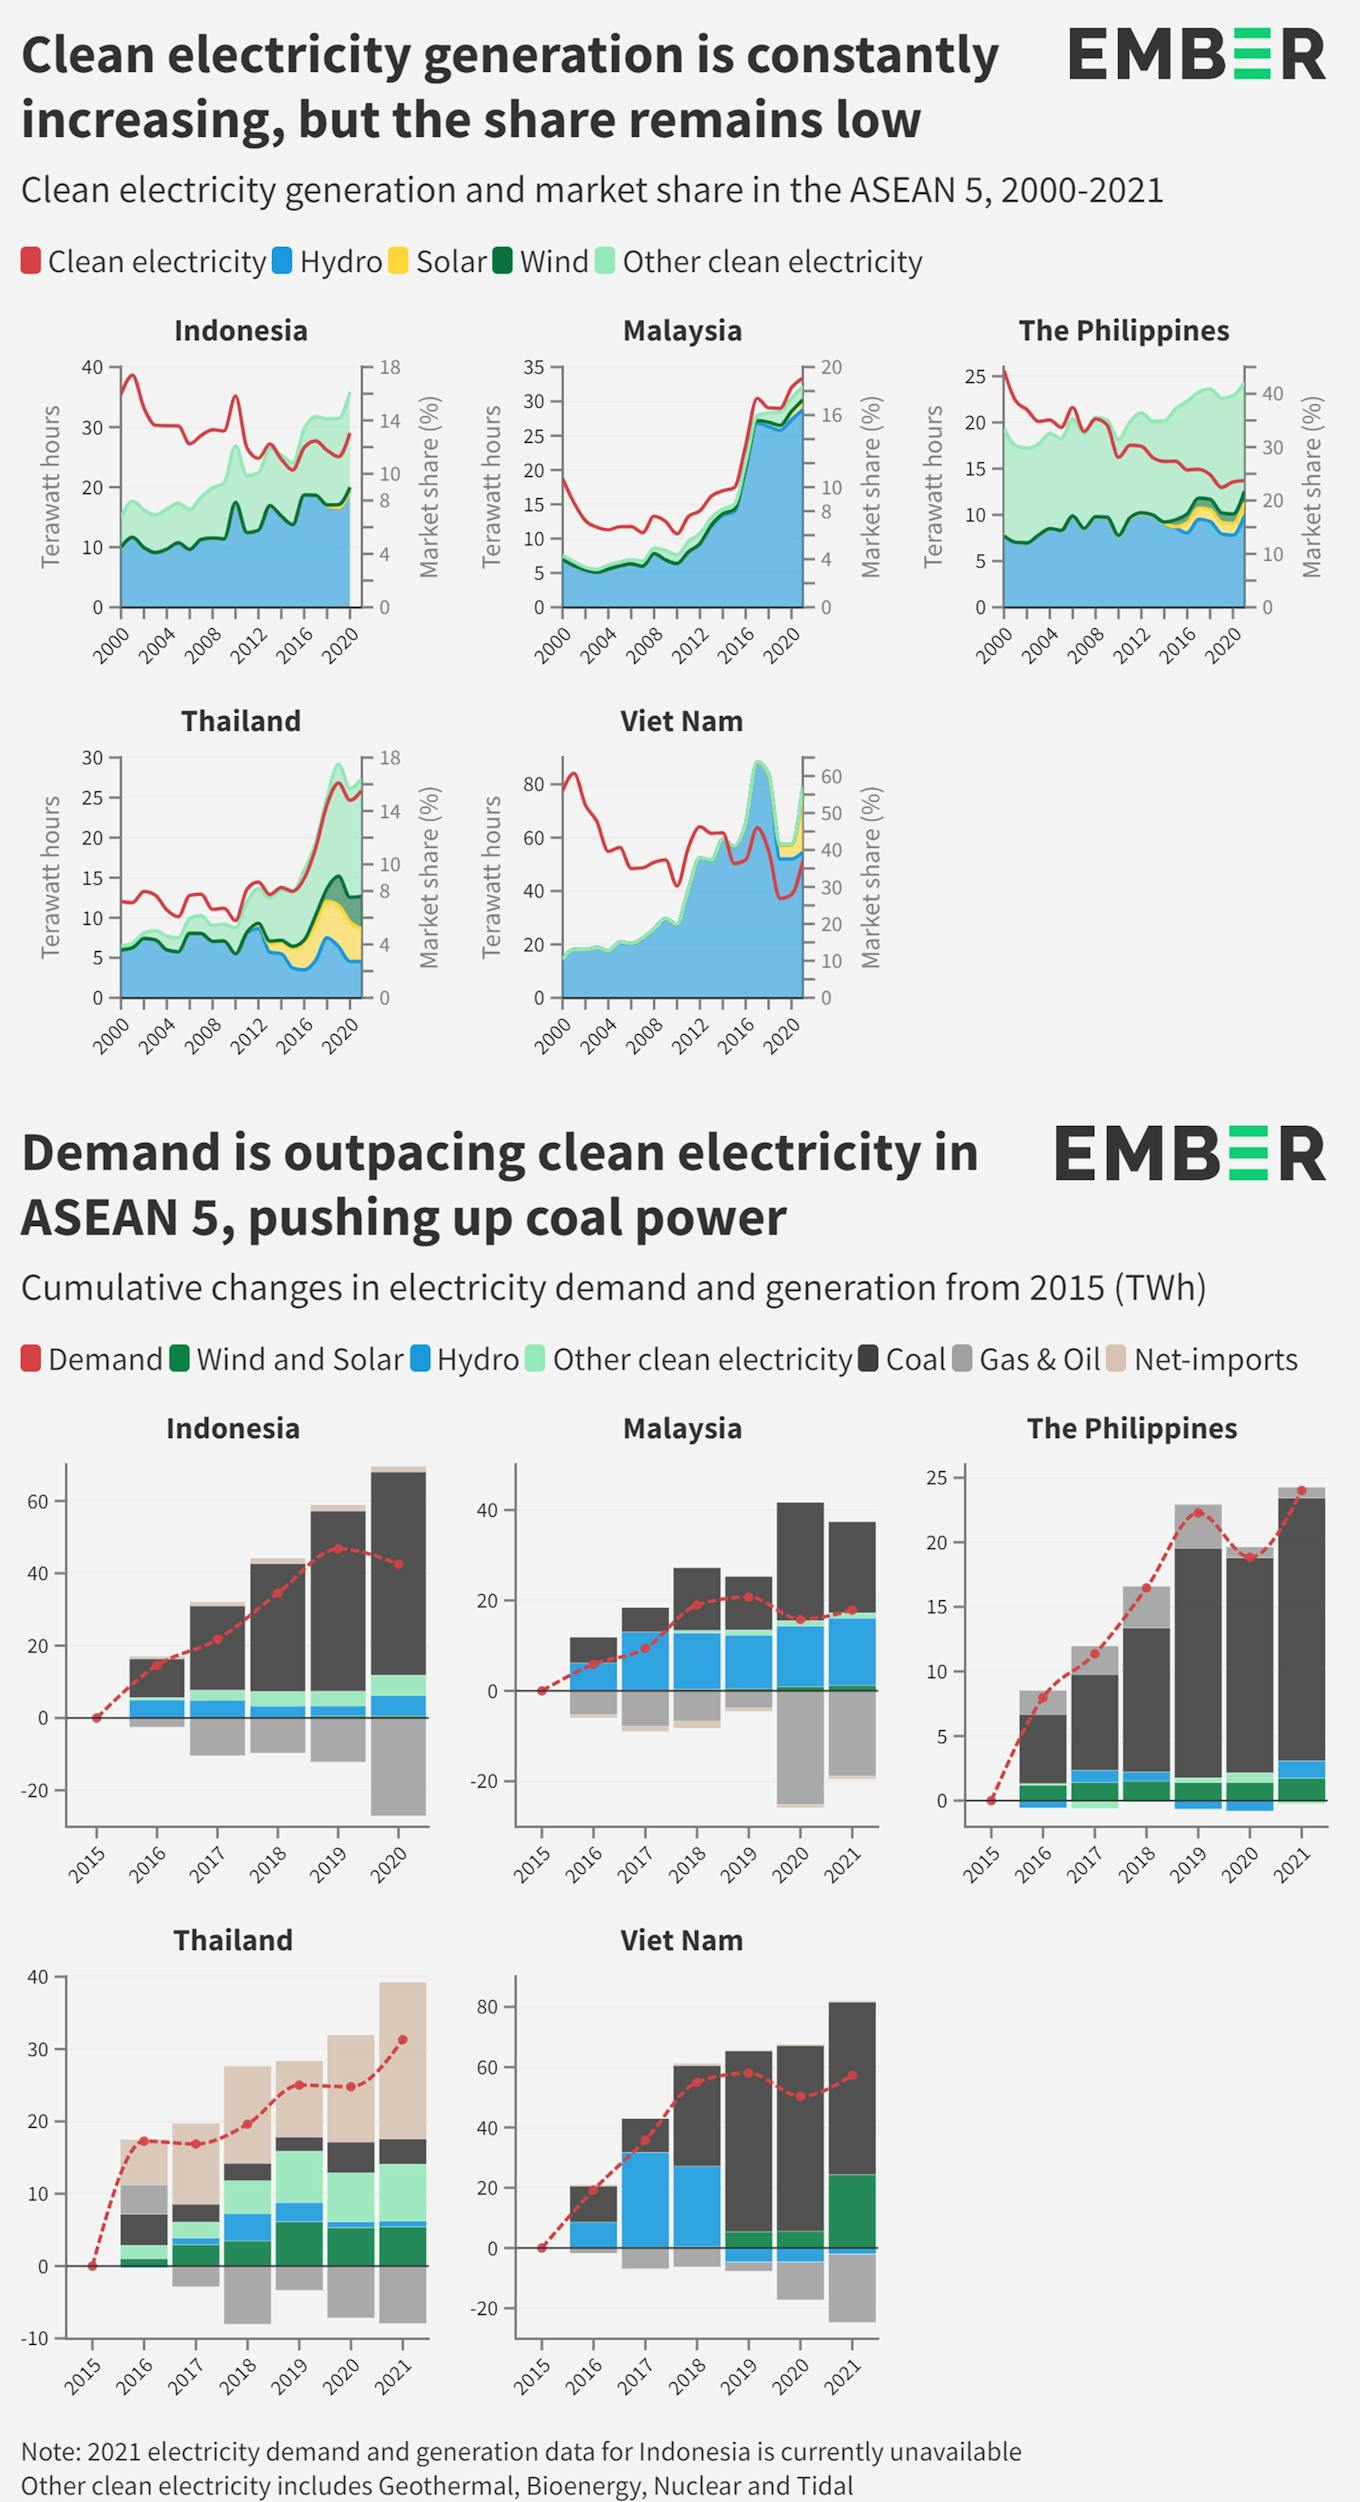 Clean energy market share and growth ASEAN 5